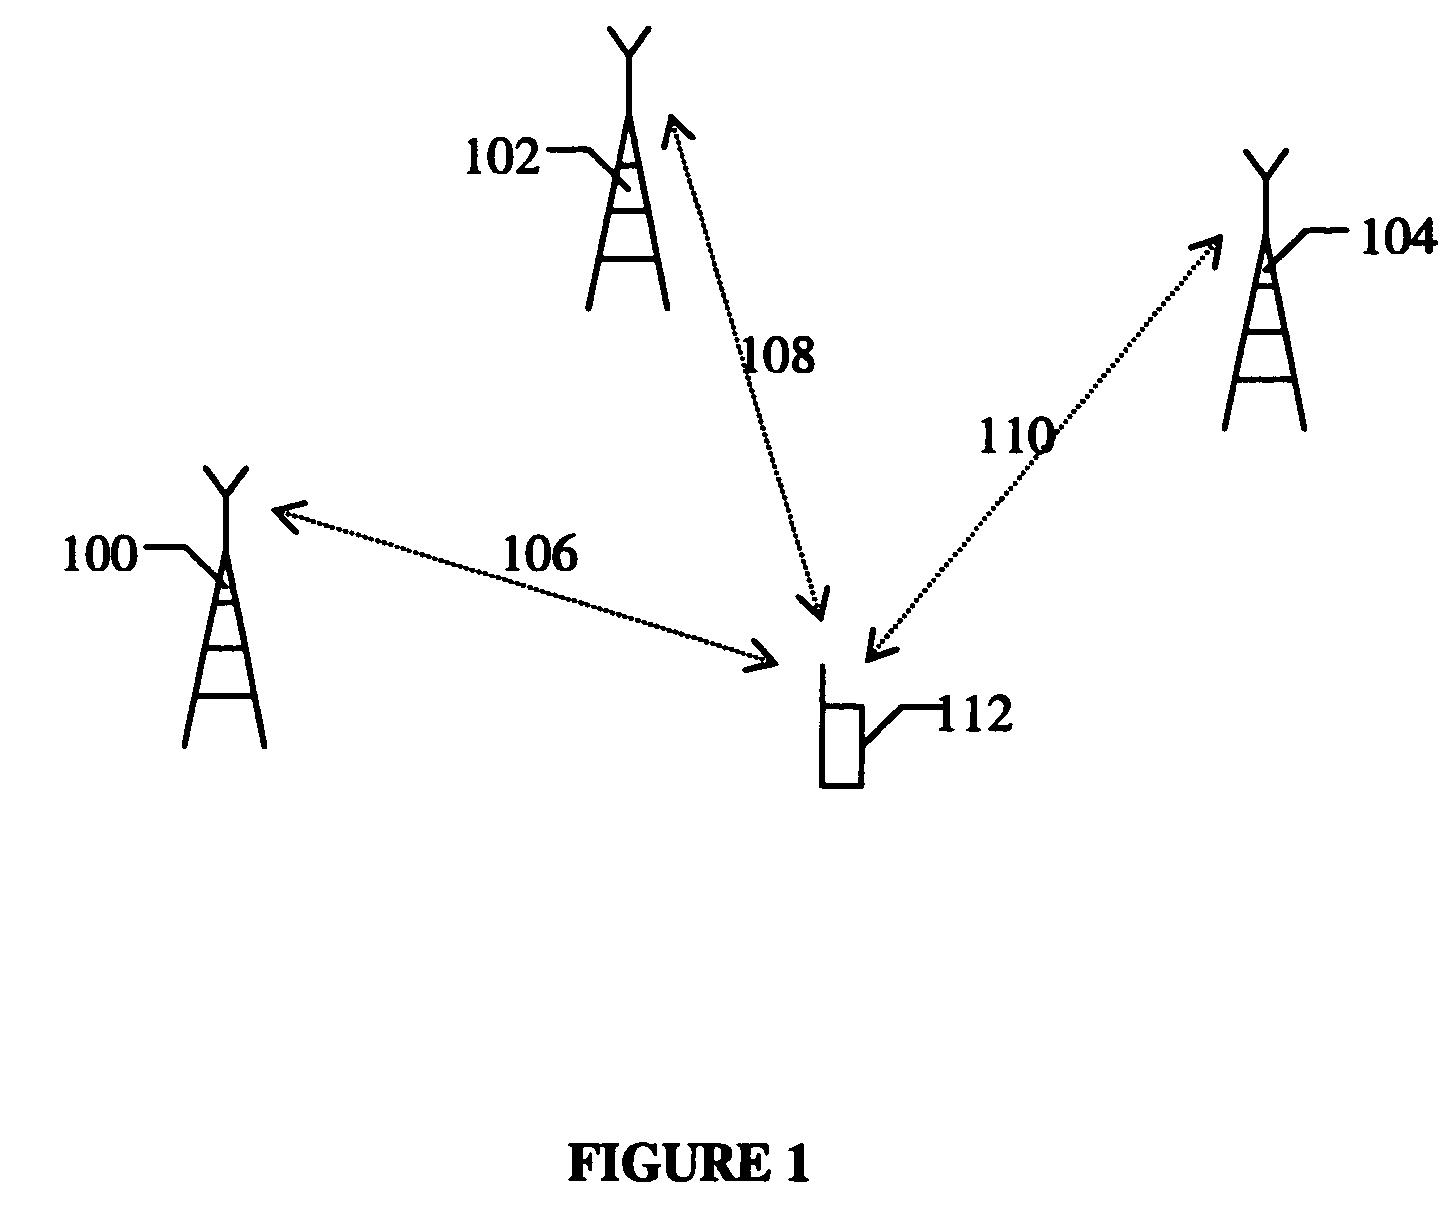 System and method for location determination